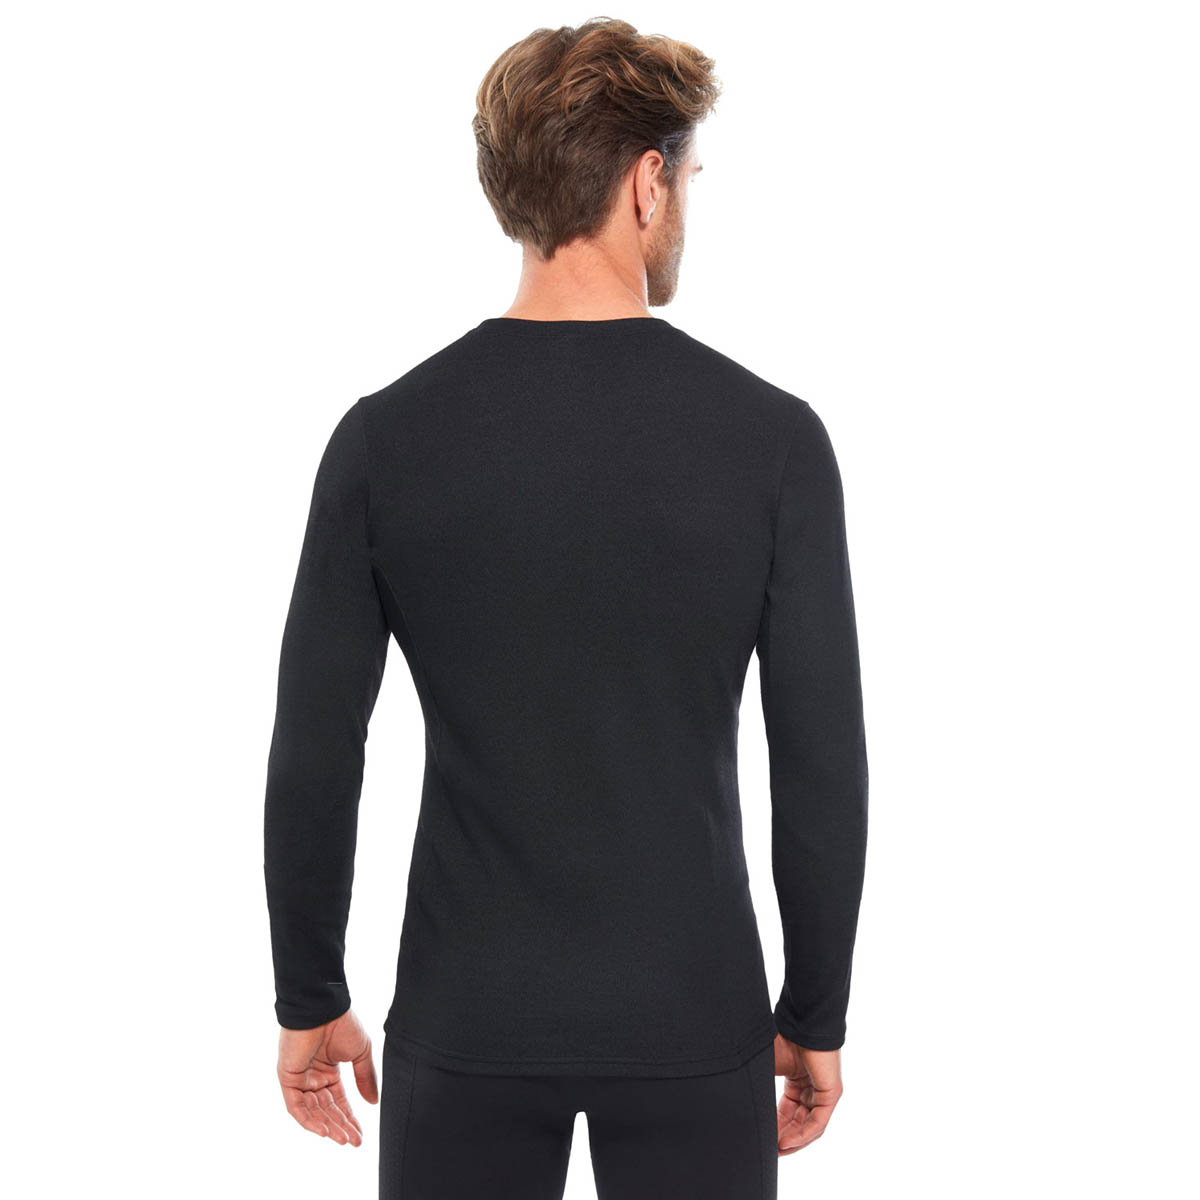 THE NORTH FACE - EASY LONG-SLEEVE TOP